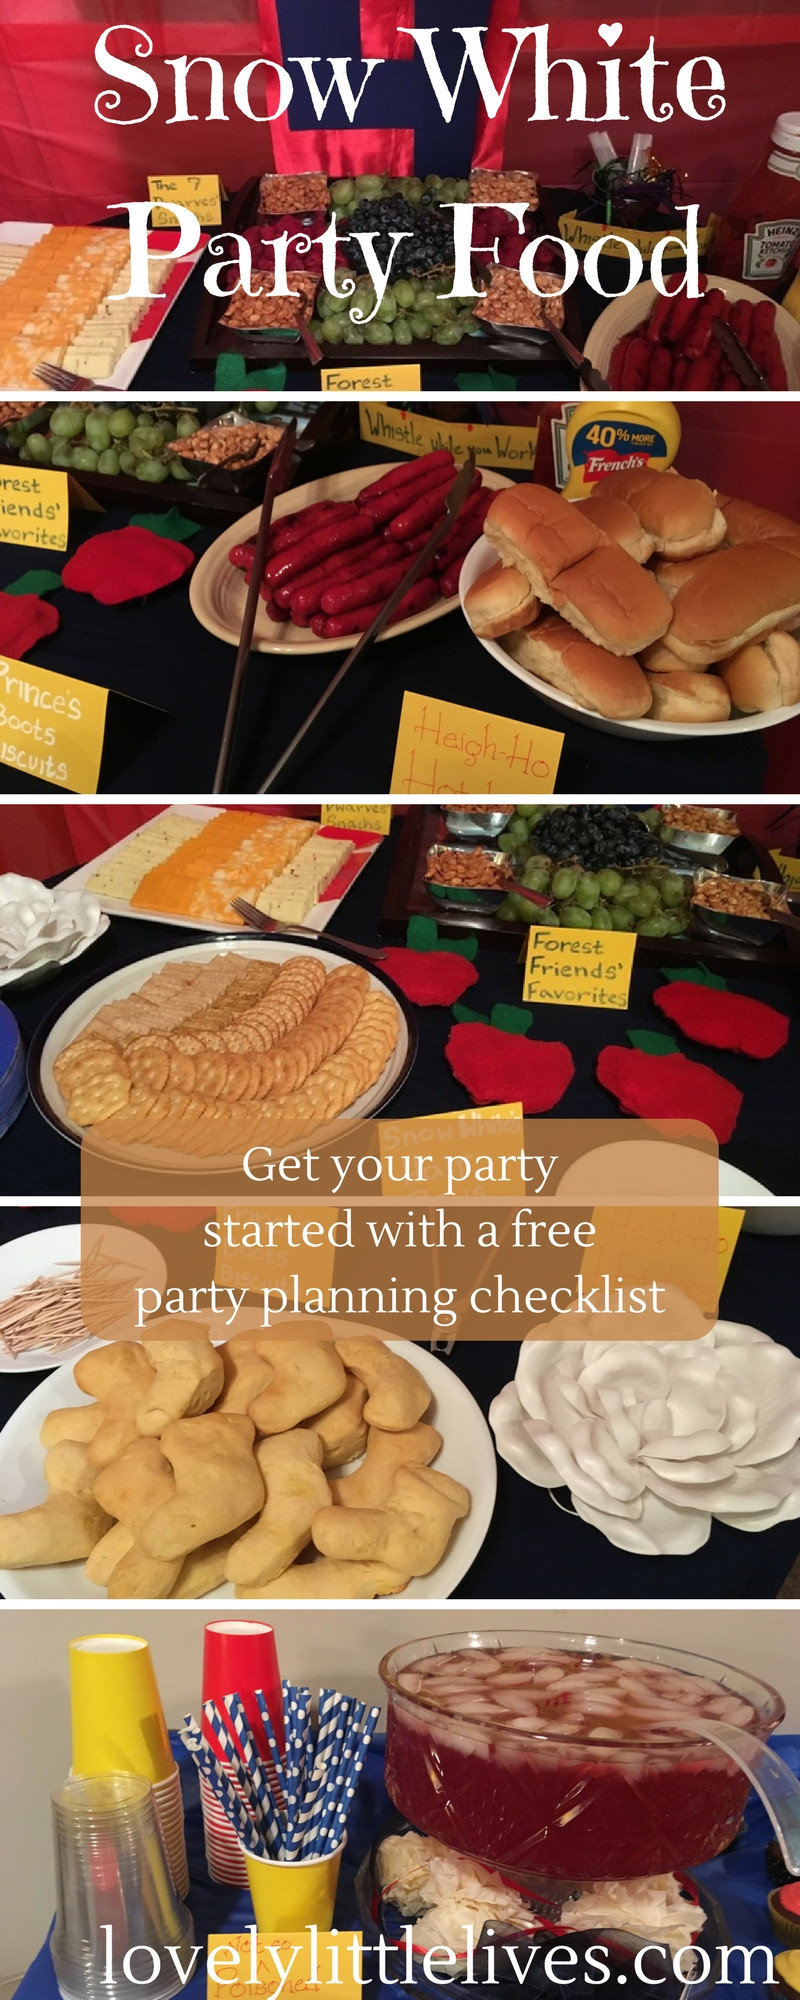 Snow White Party Food Ideas
 How to Plan a Sensational Snow White Party Lovely Little